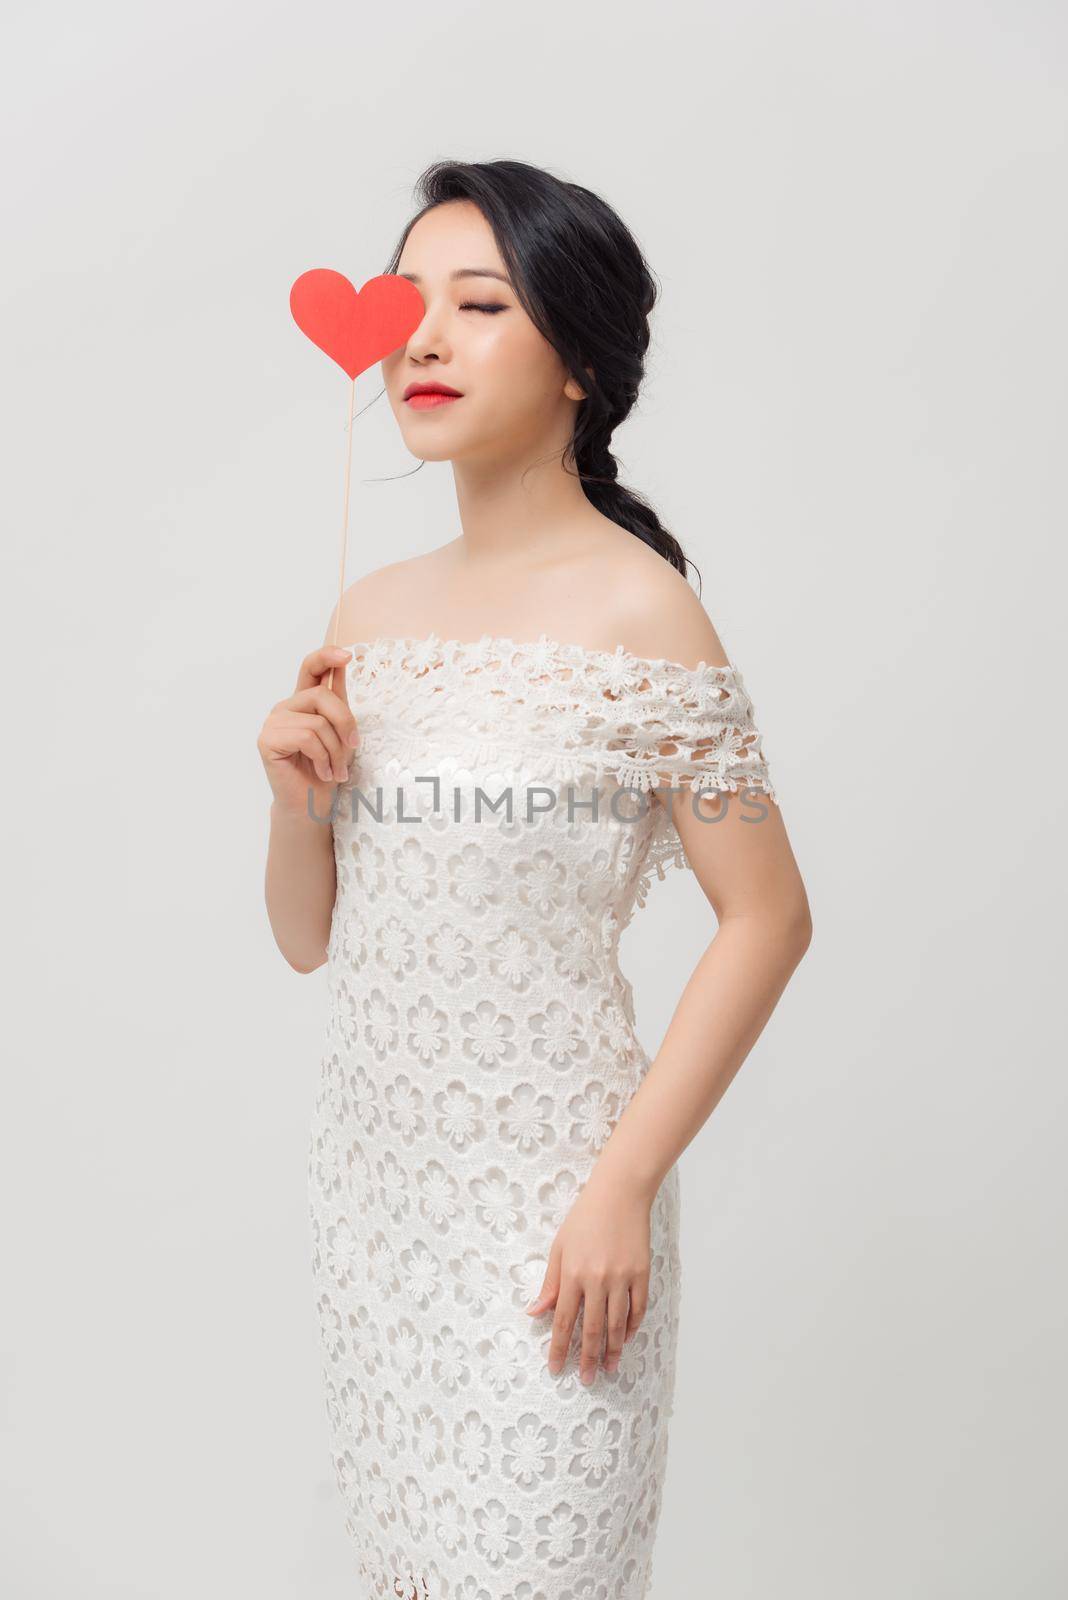 Elegant Asian woman holding a parper heart and standing isolated over white background. by makidotvn